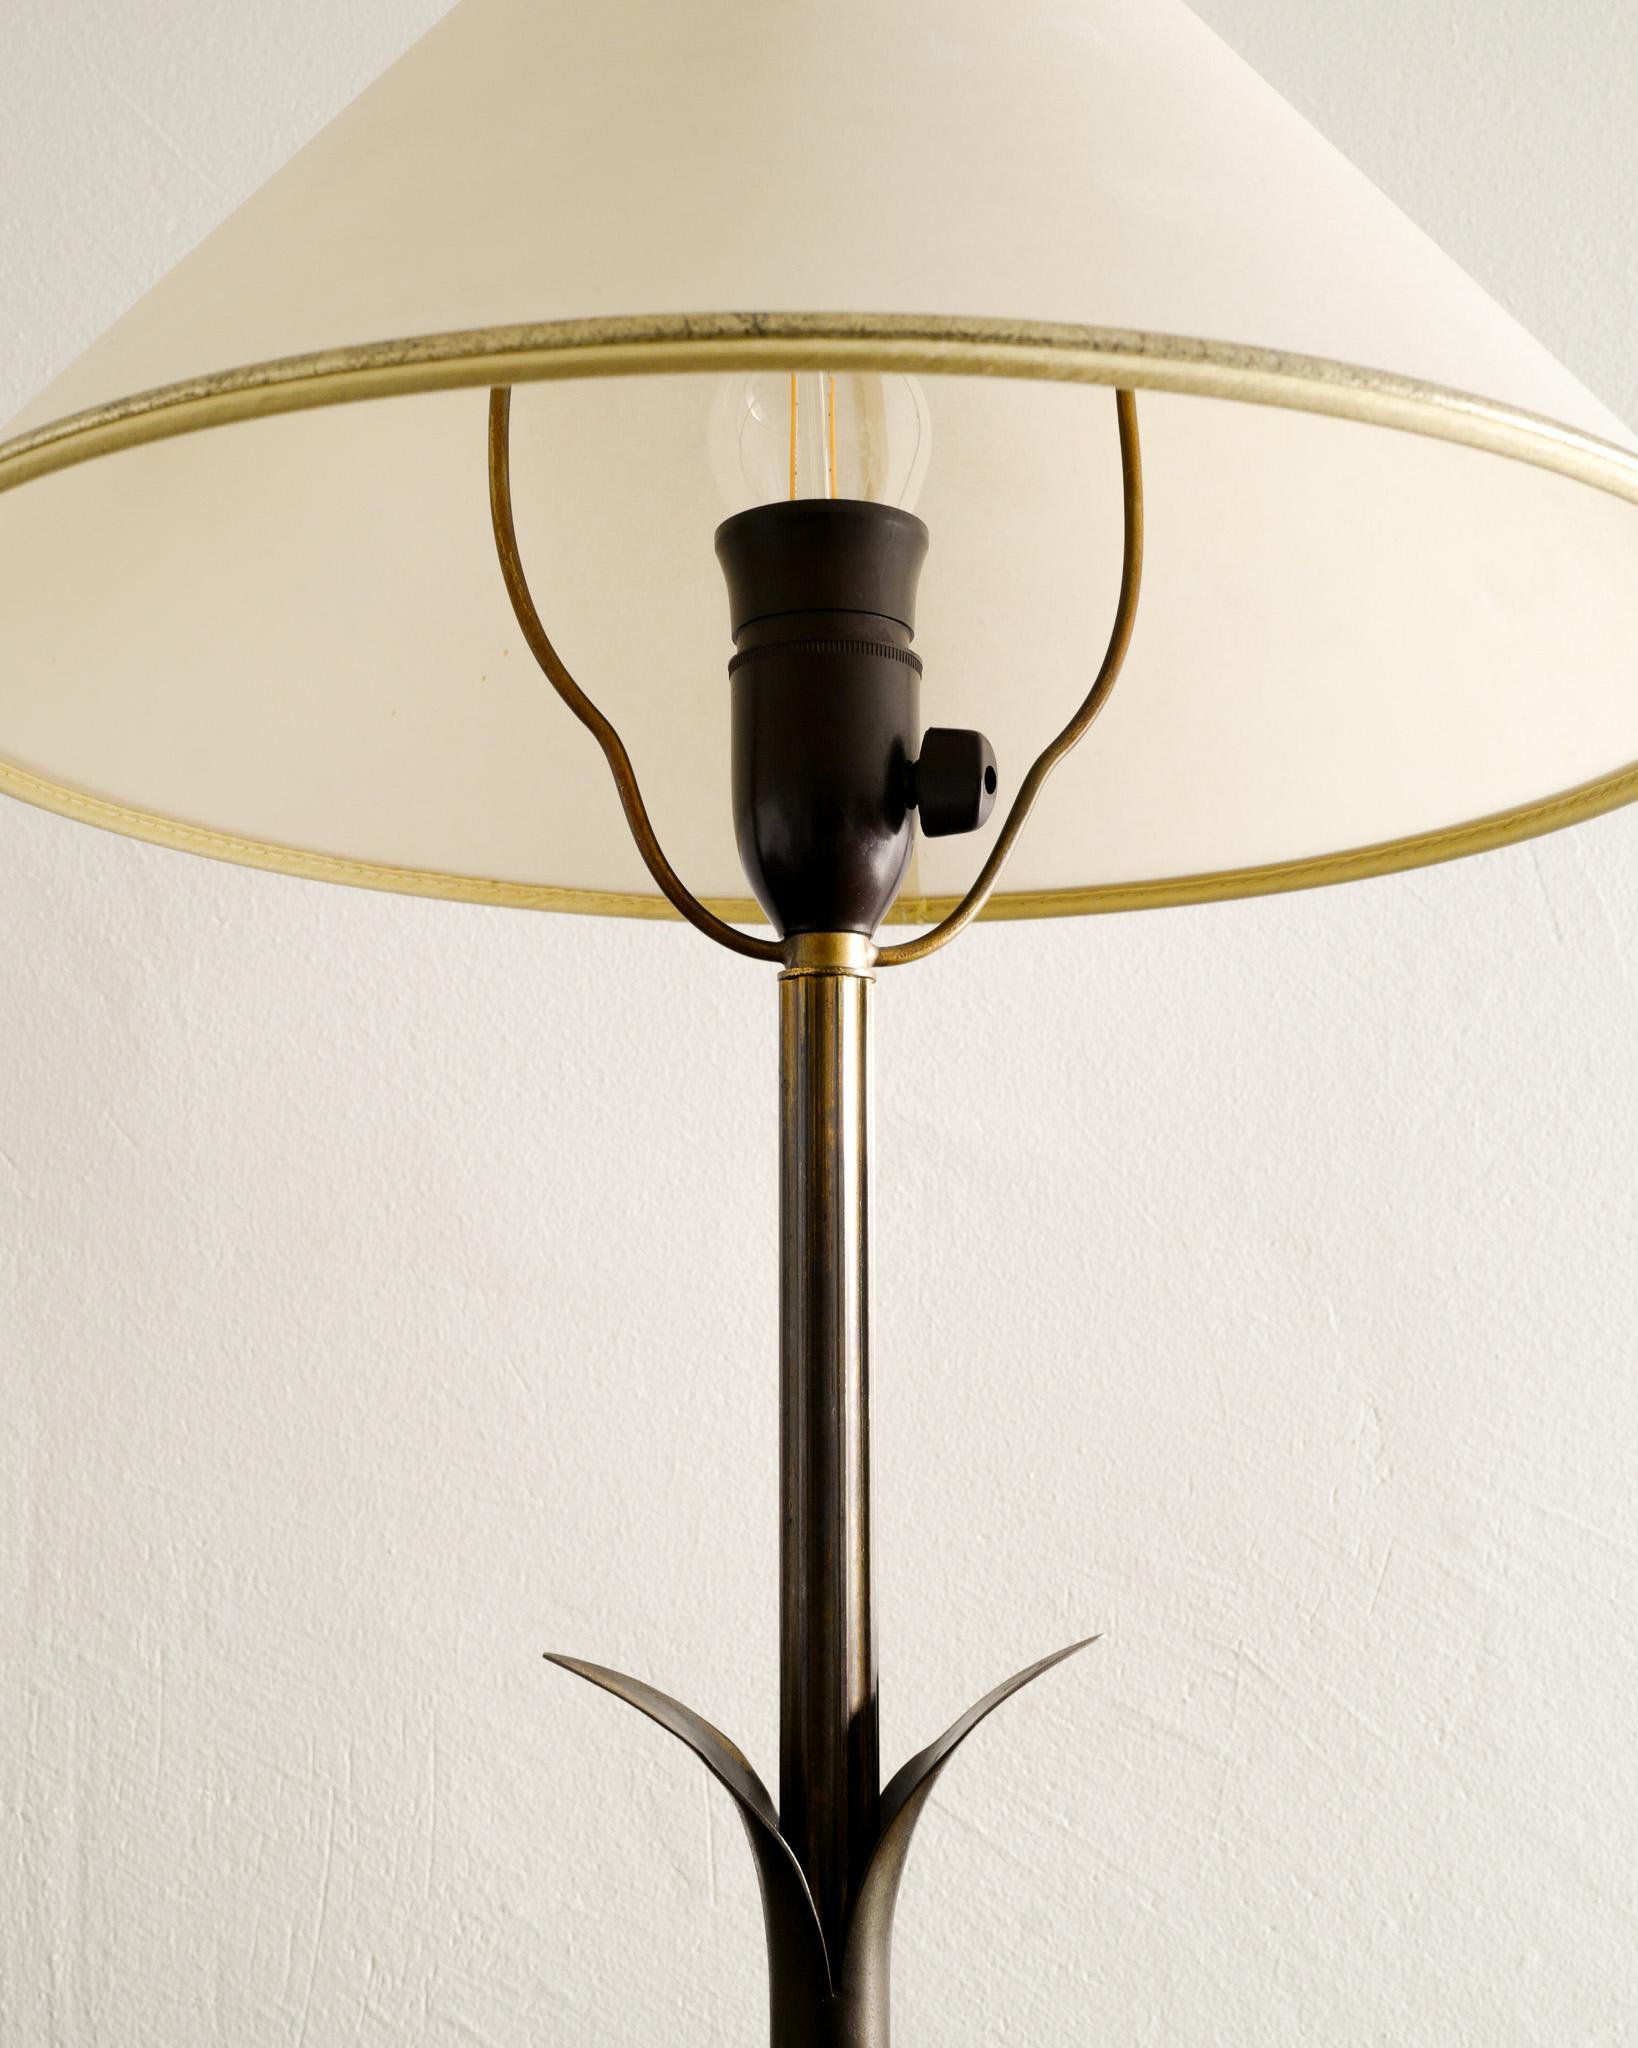 Danish Decorative Art Déco Table Lamp in Bronze with Original Shade, 1930s  For Sale 1